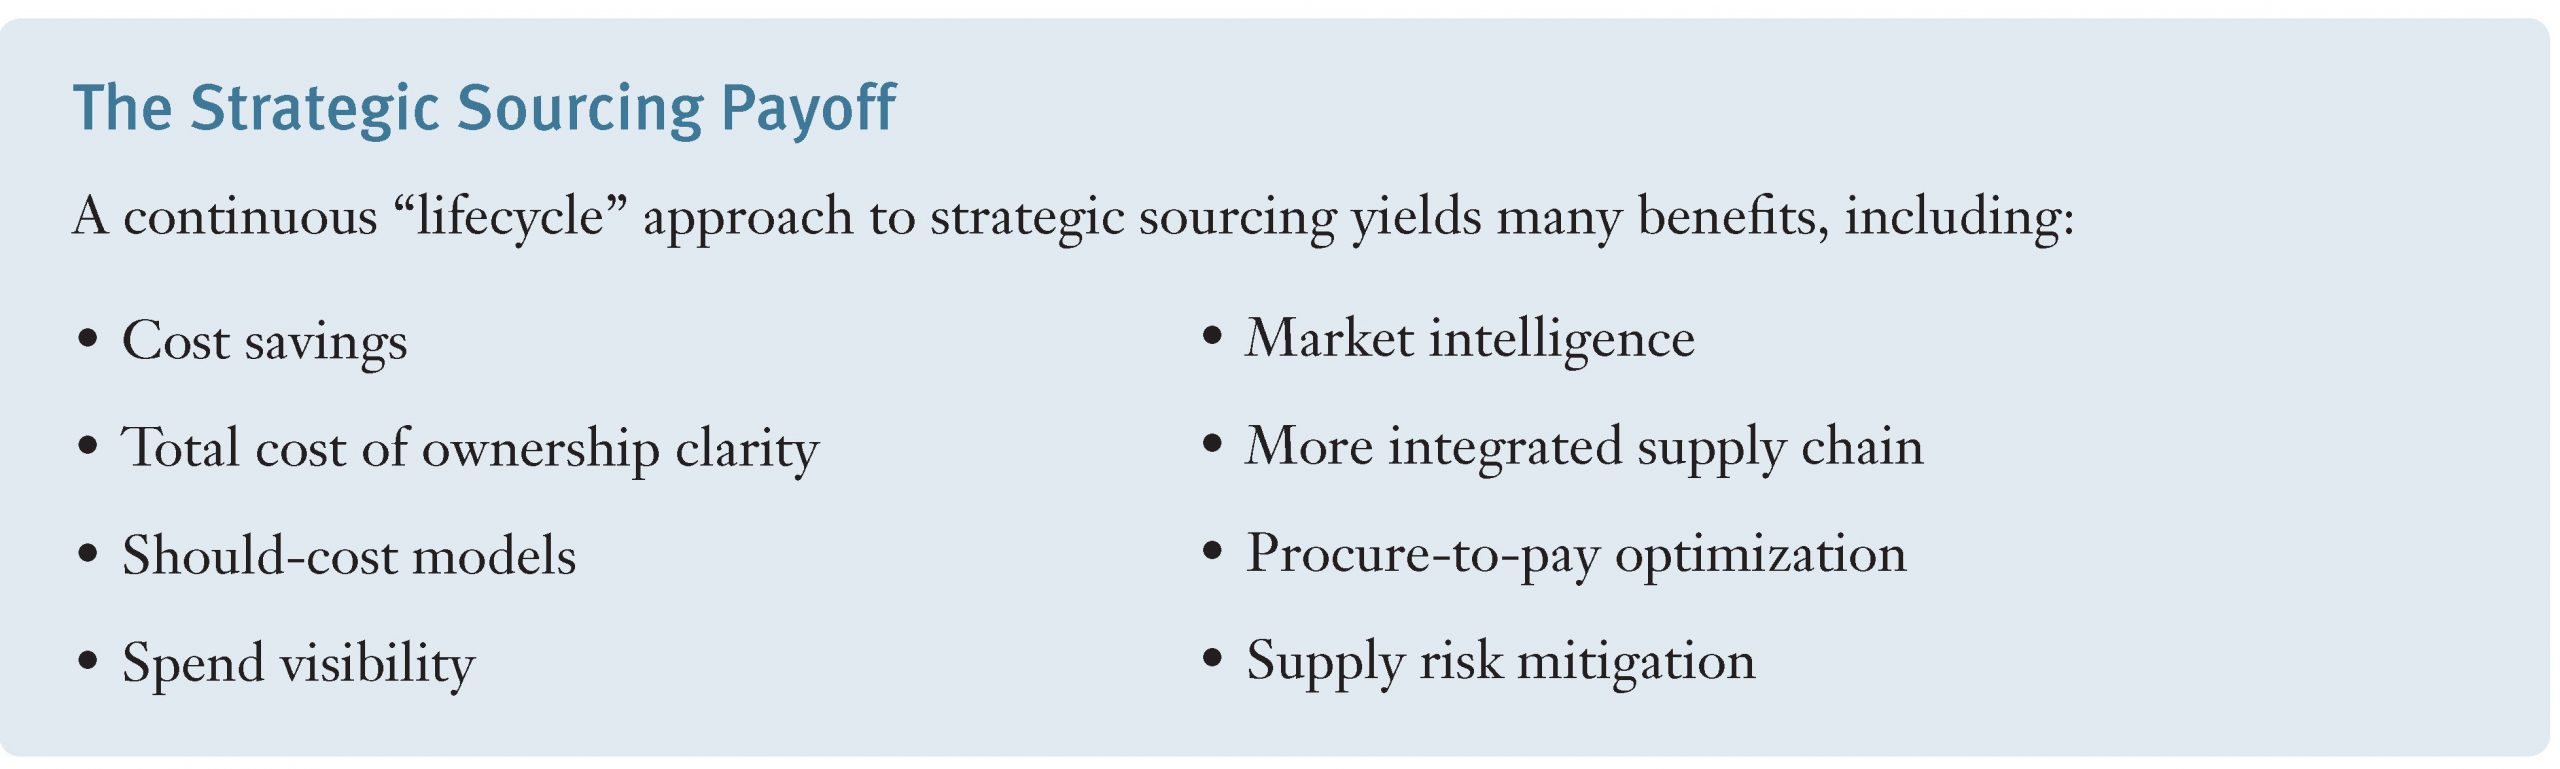 Strategic Sourcing Payoff